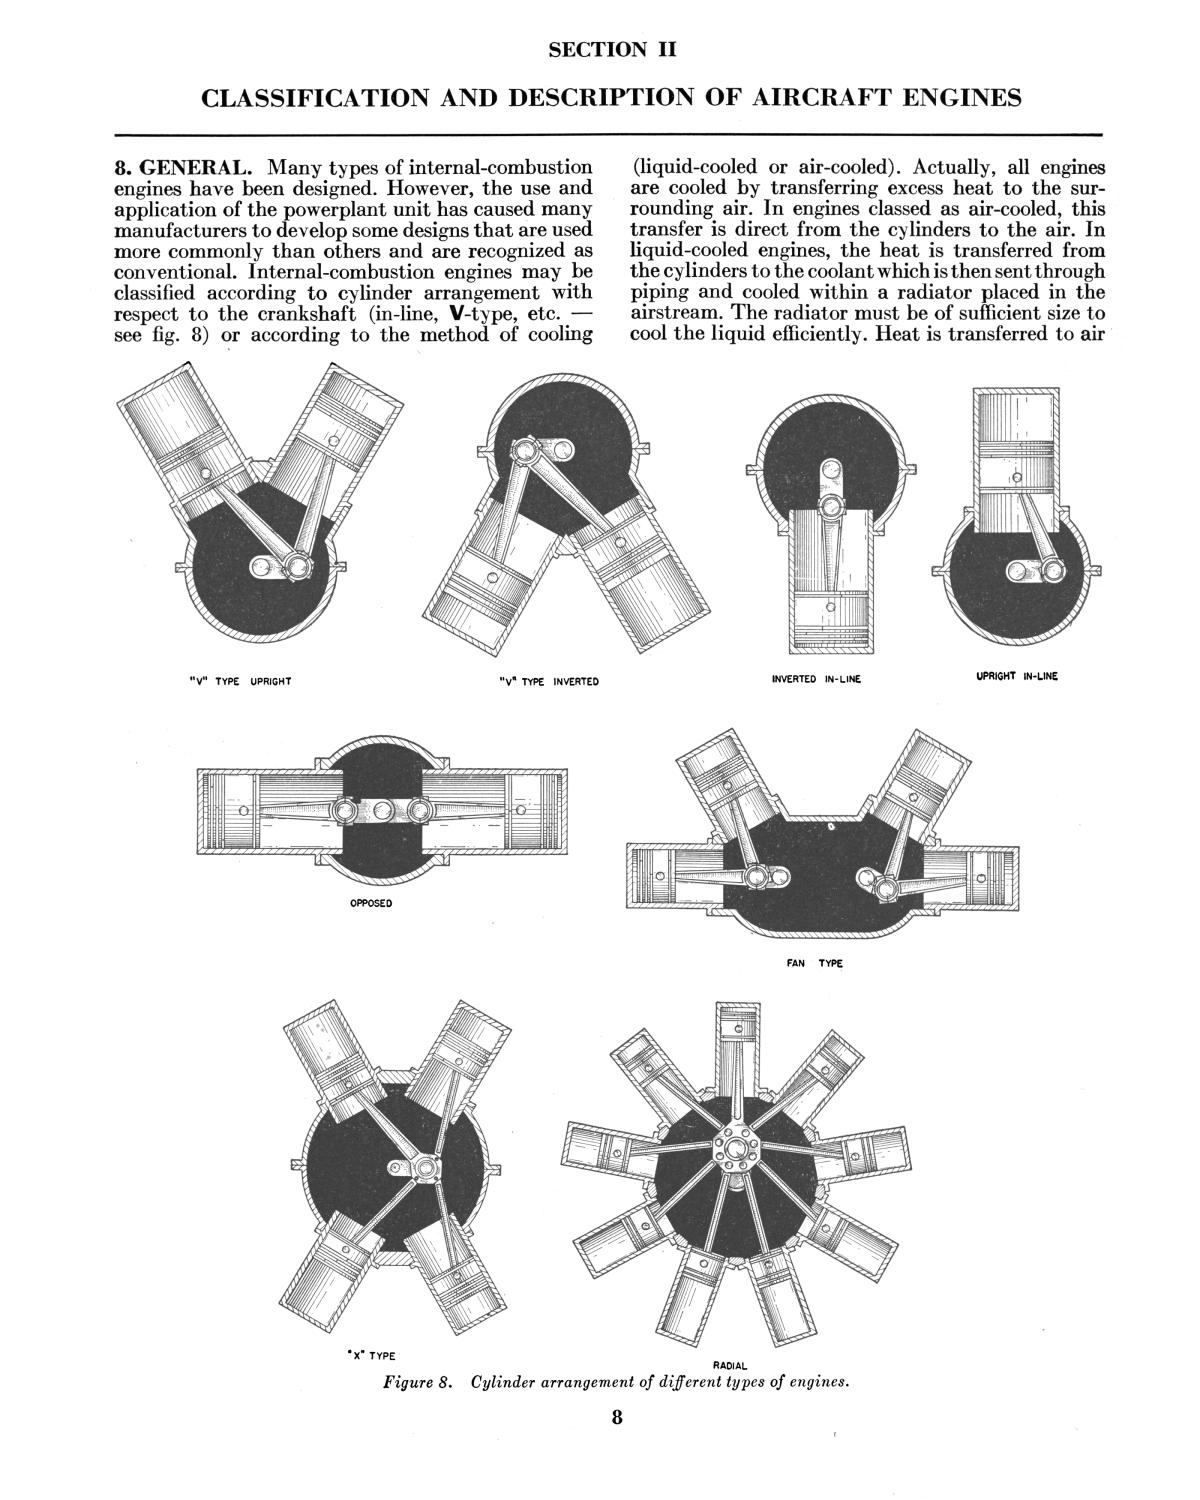 Aircraft engines. - Page 8 - Digital Library